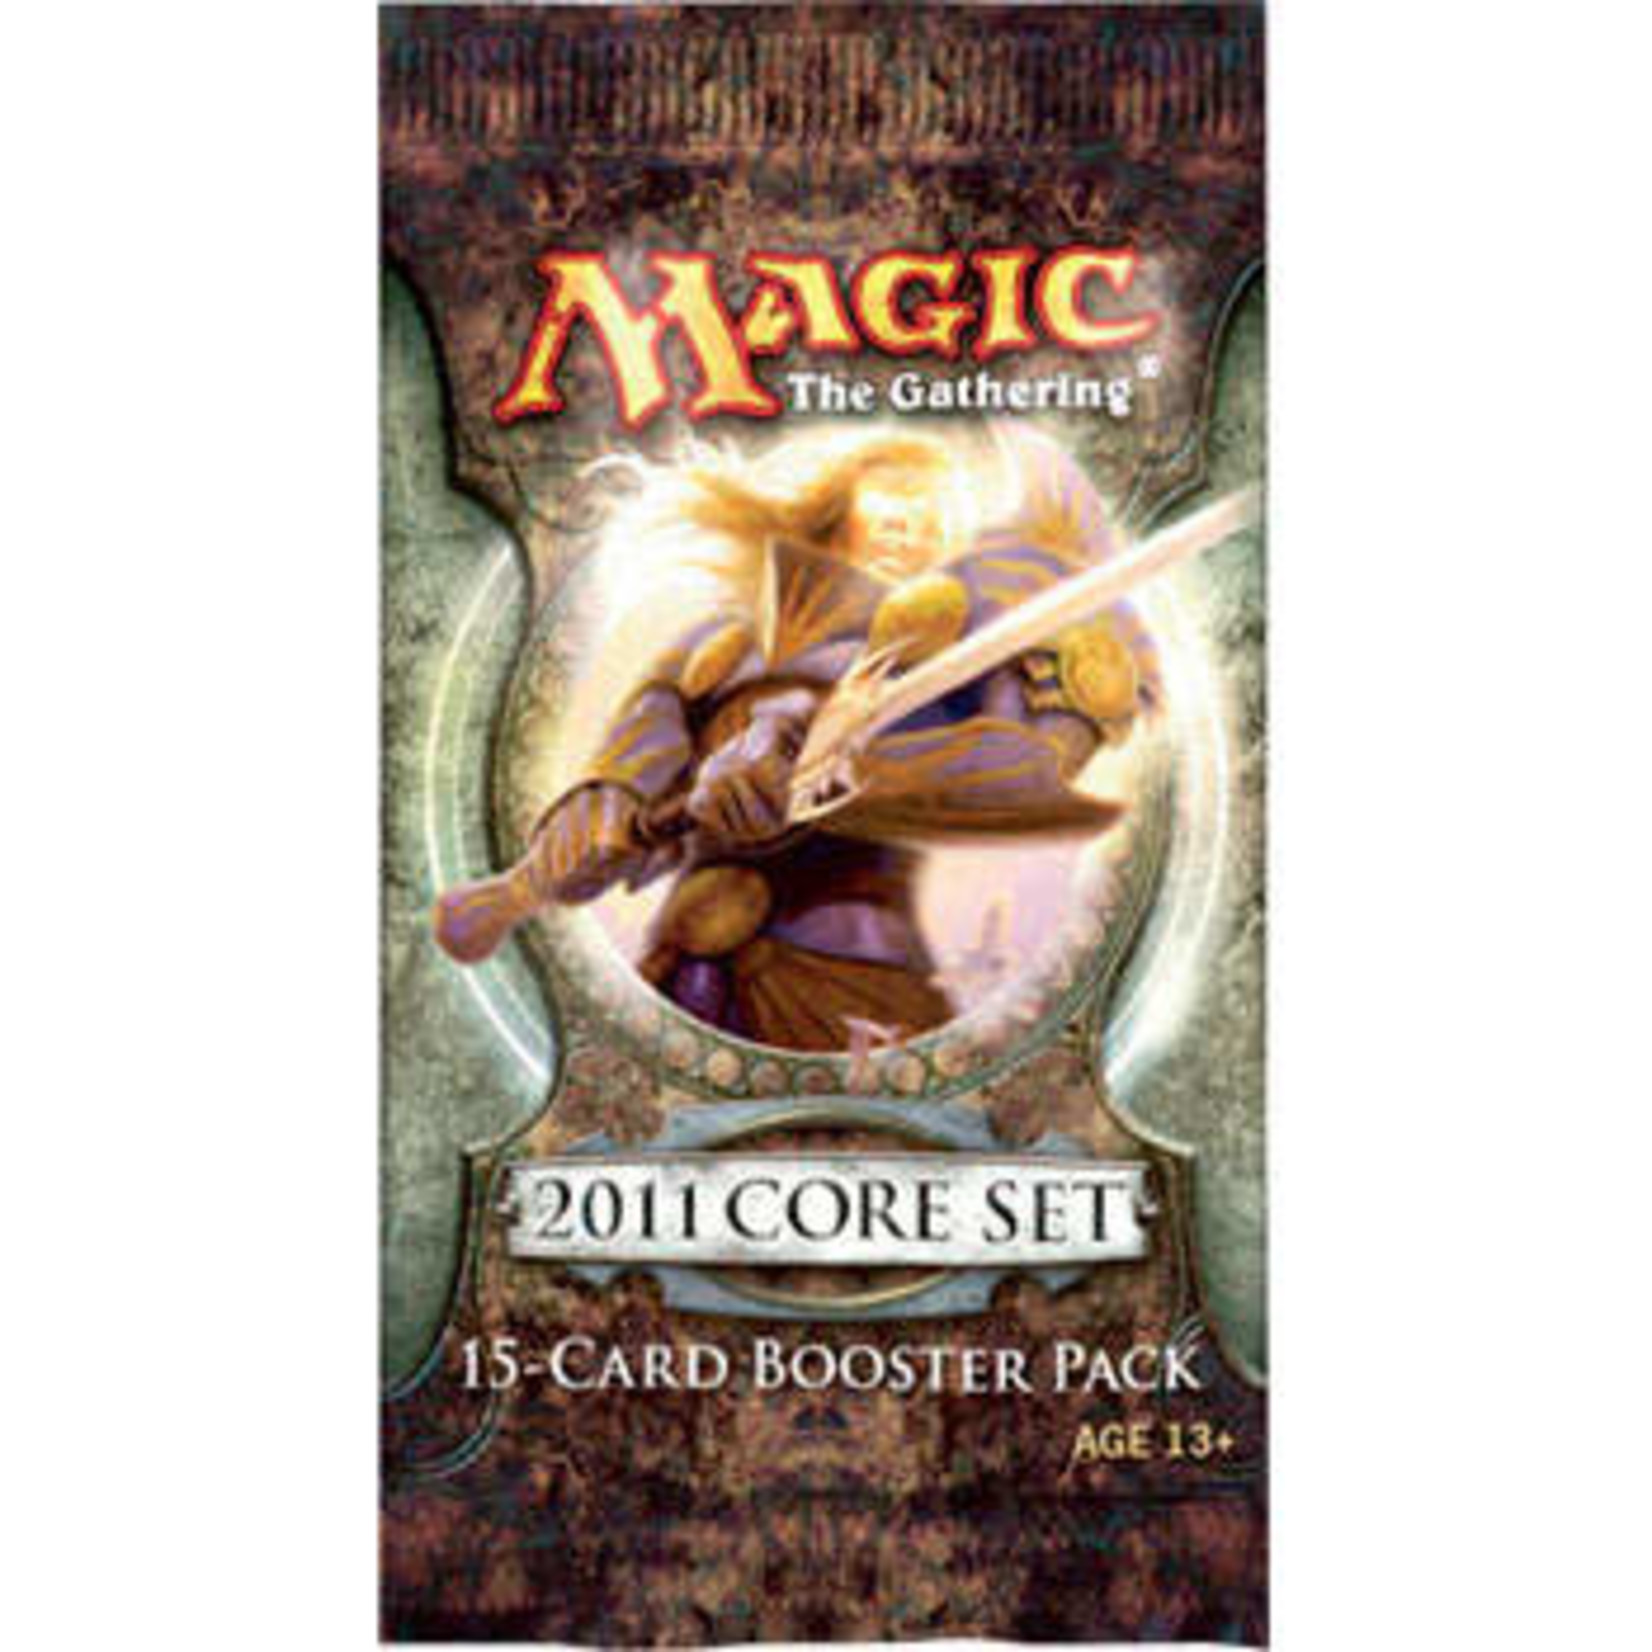 Wizards of the Coast Magic the Gathering 2011 Core Set M11 Booster Pack